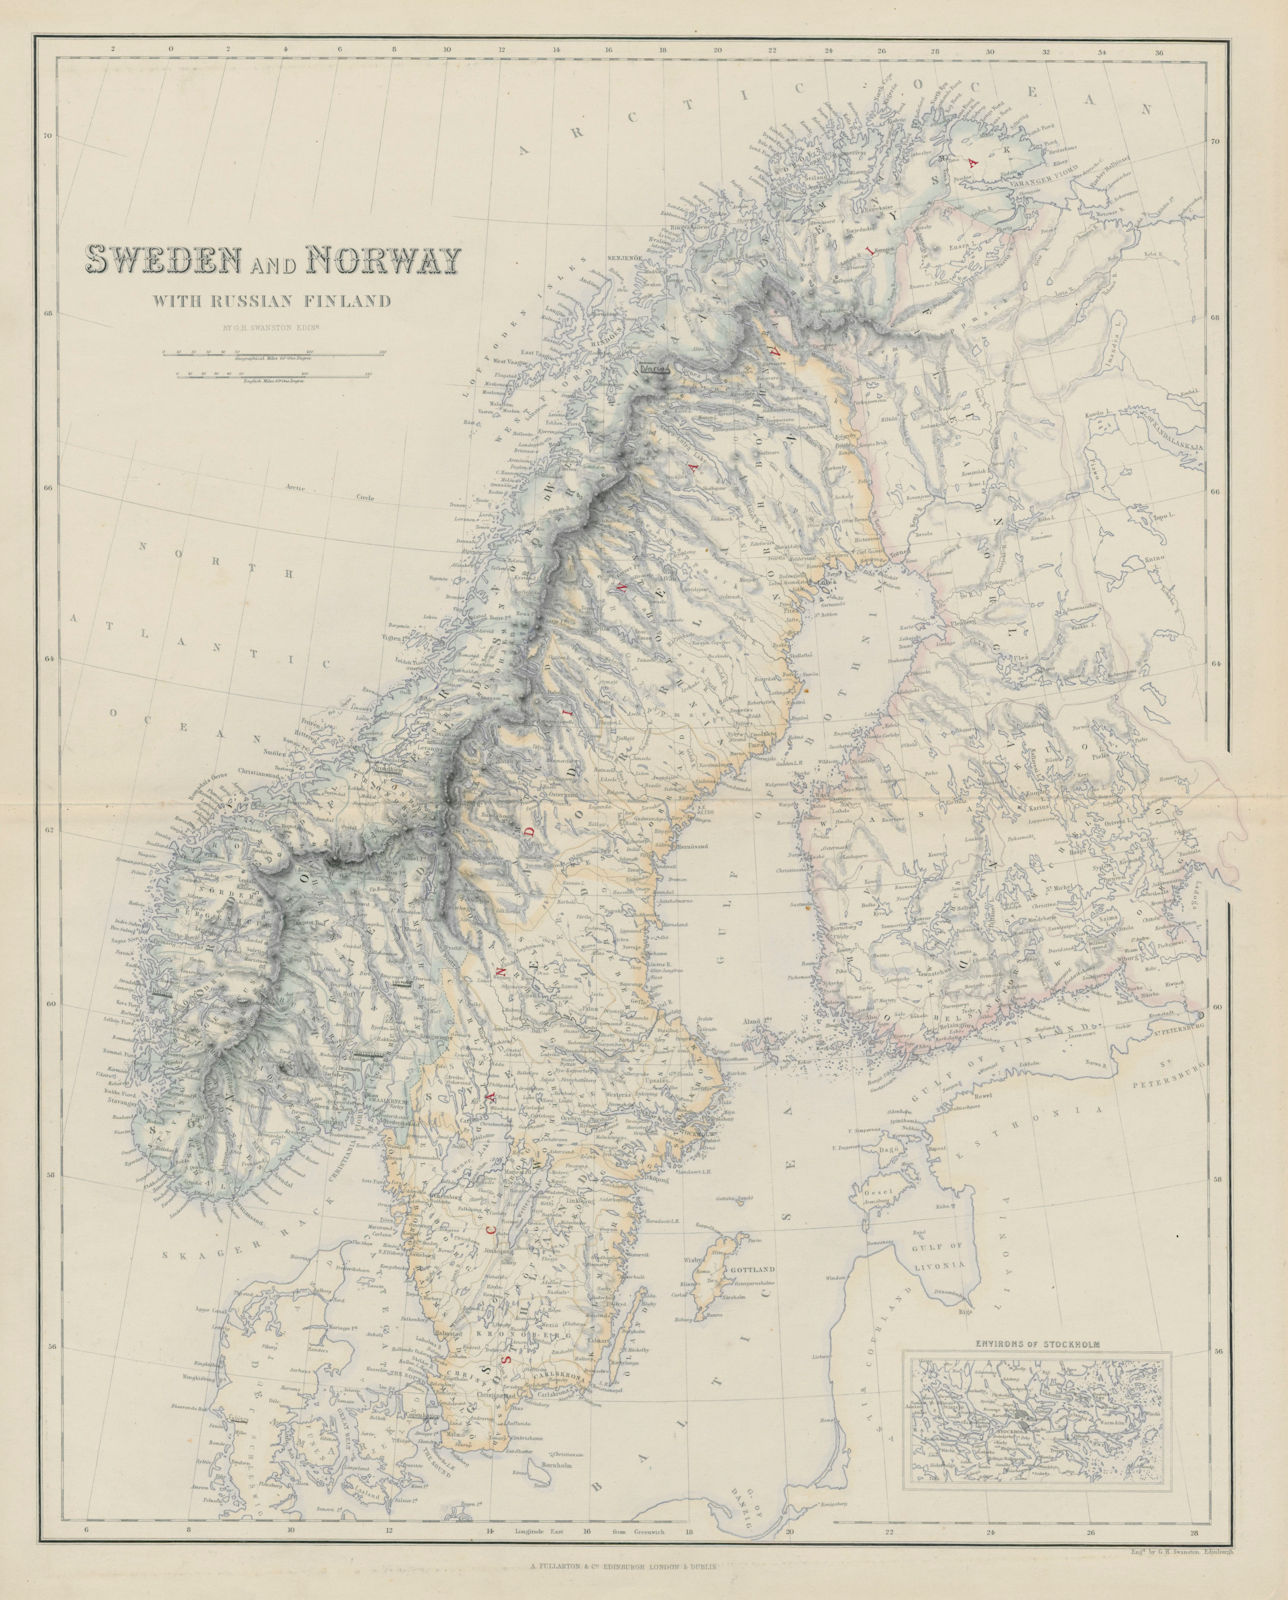 Associate Product Sweden and Norway with Russian Finland. Scandinavia. SWANSTON 1860 old map